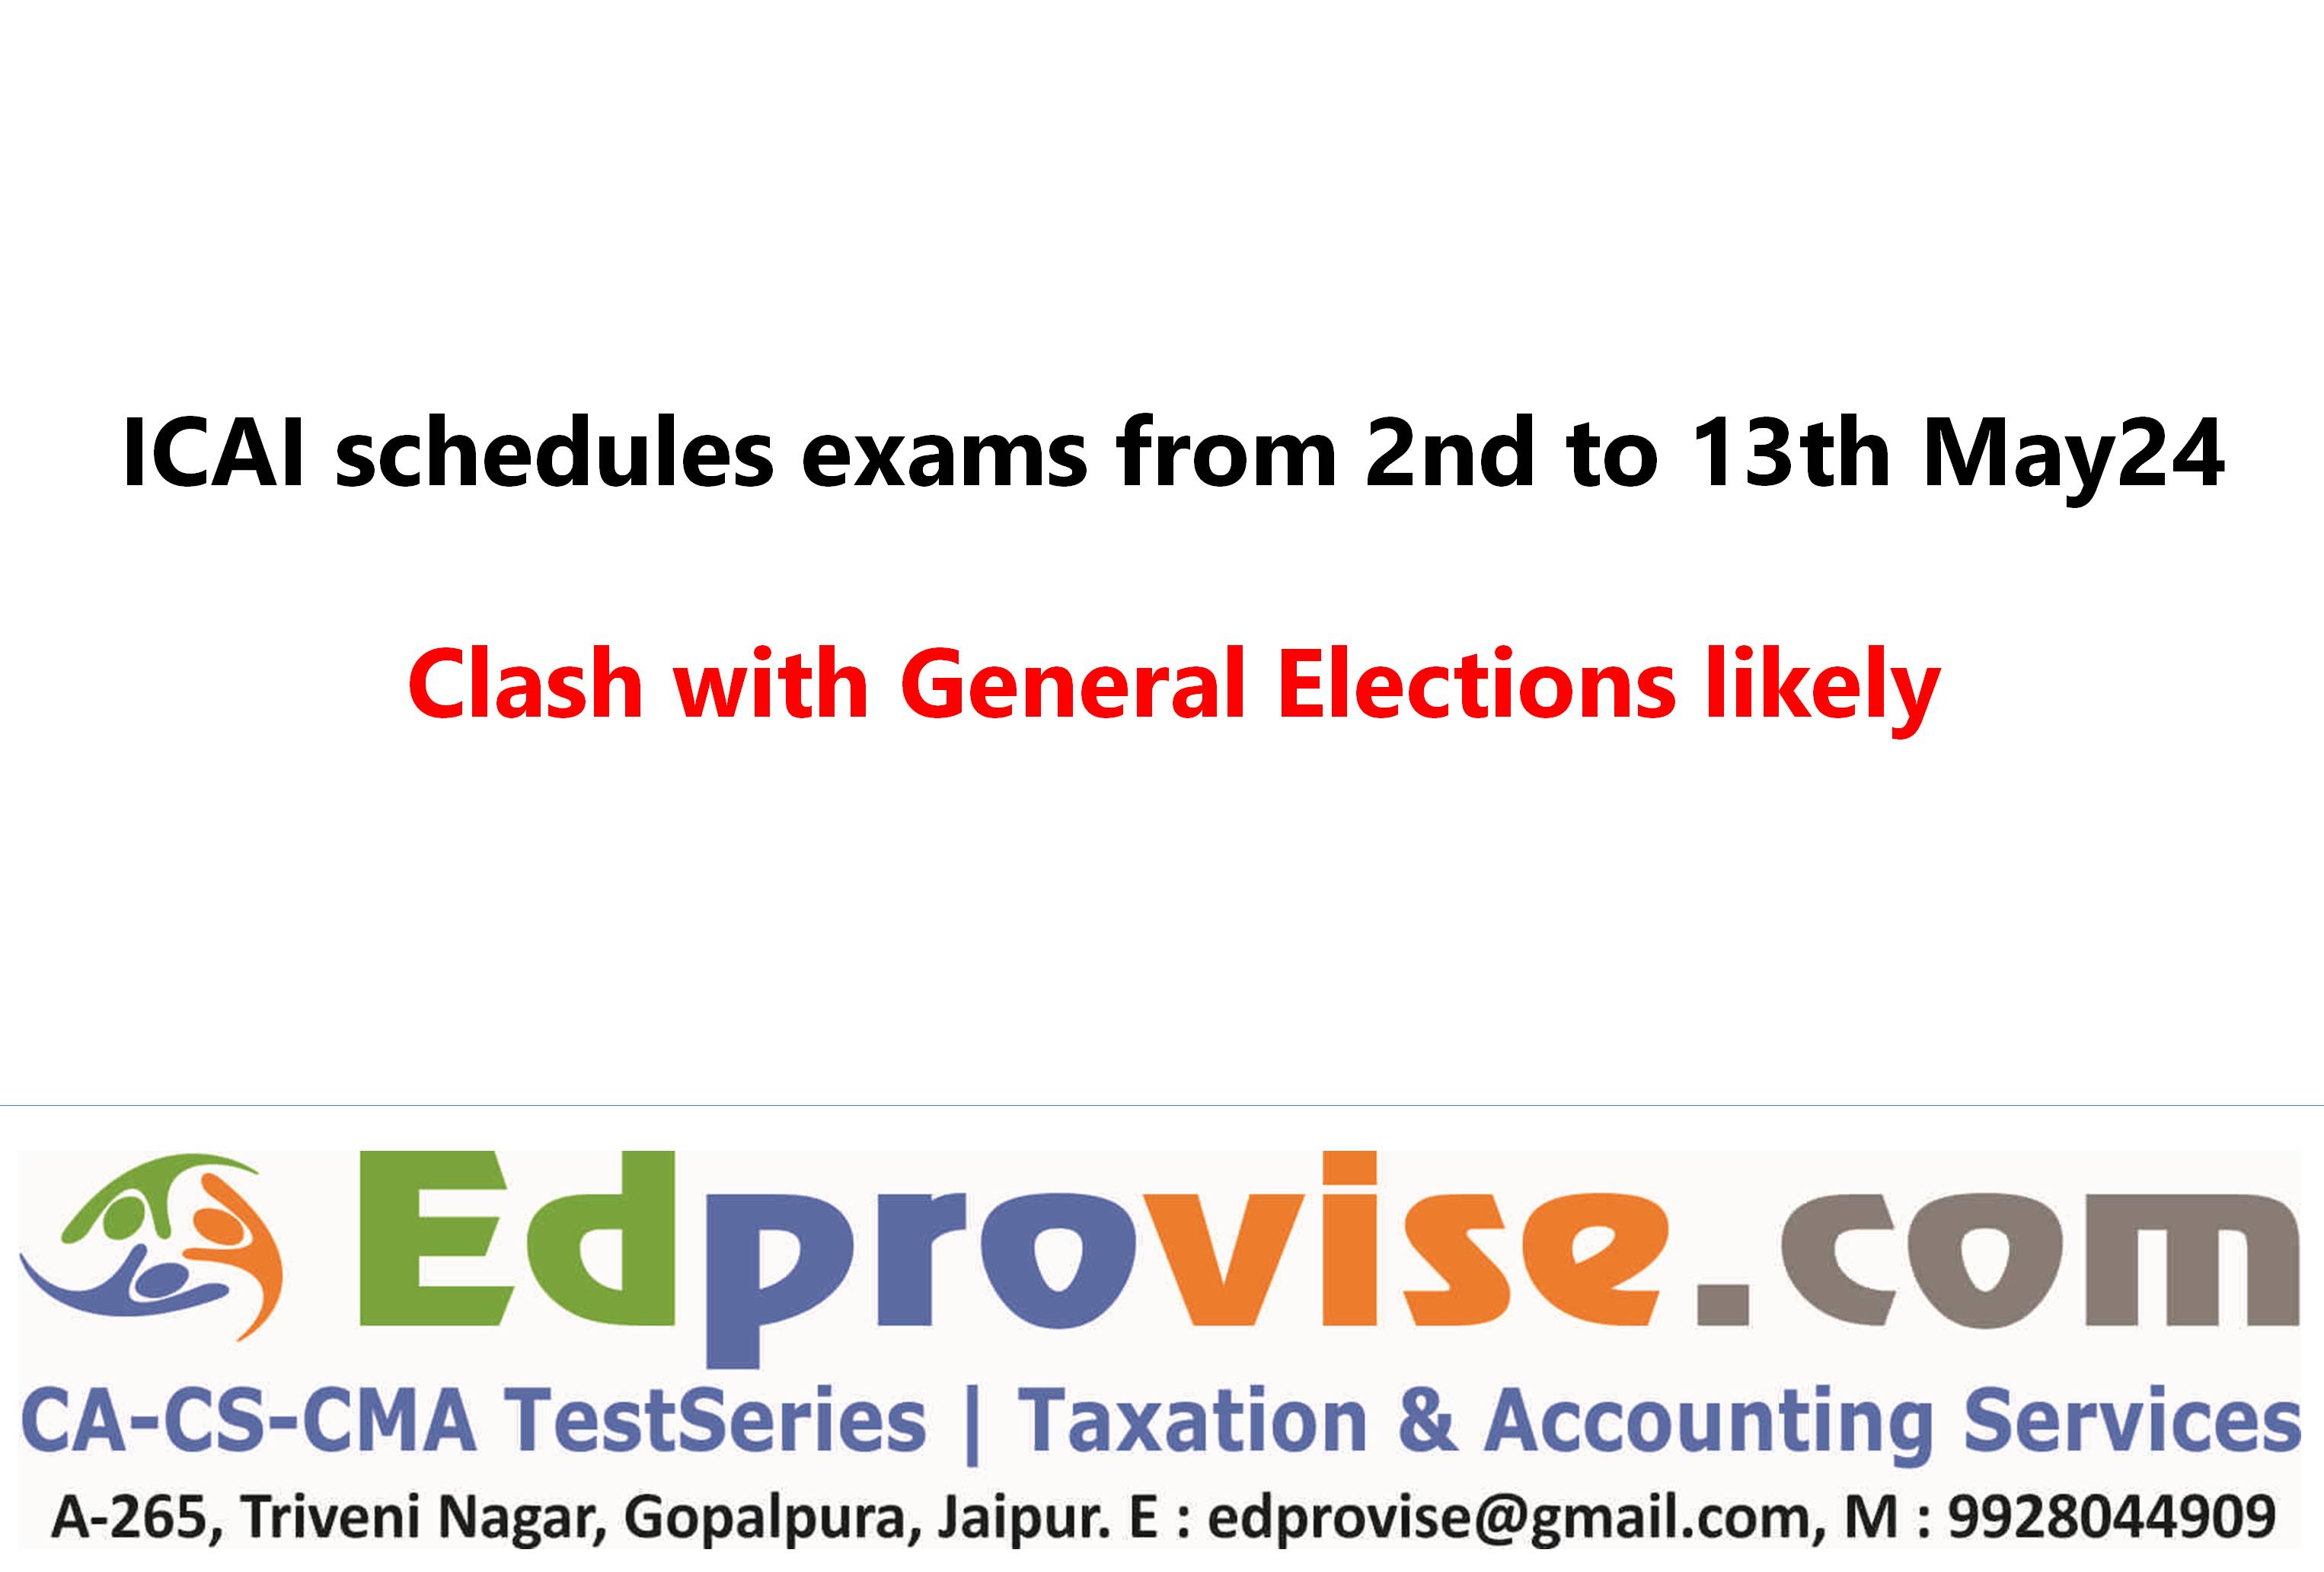 ICAI schedules exams from 2nd to 13th May 2024 -- Clash with General Elections likely